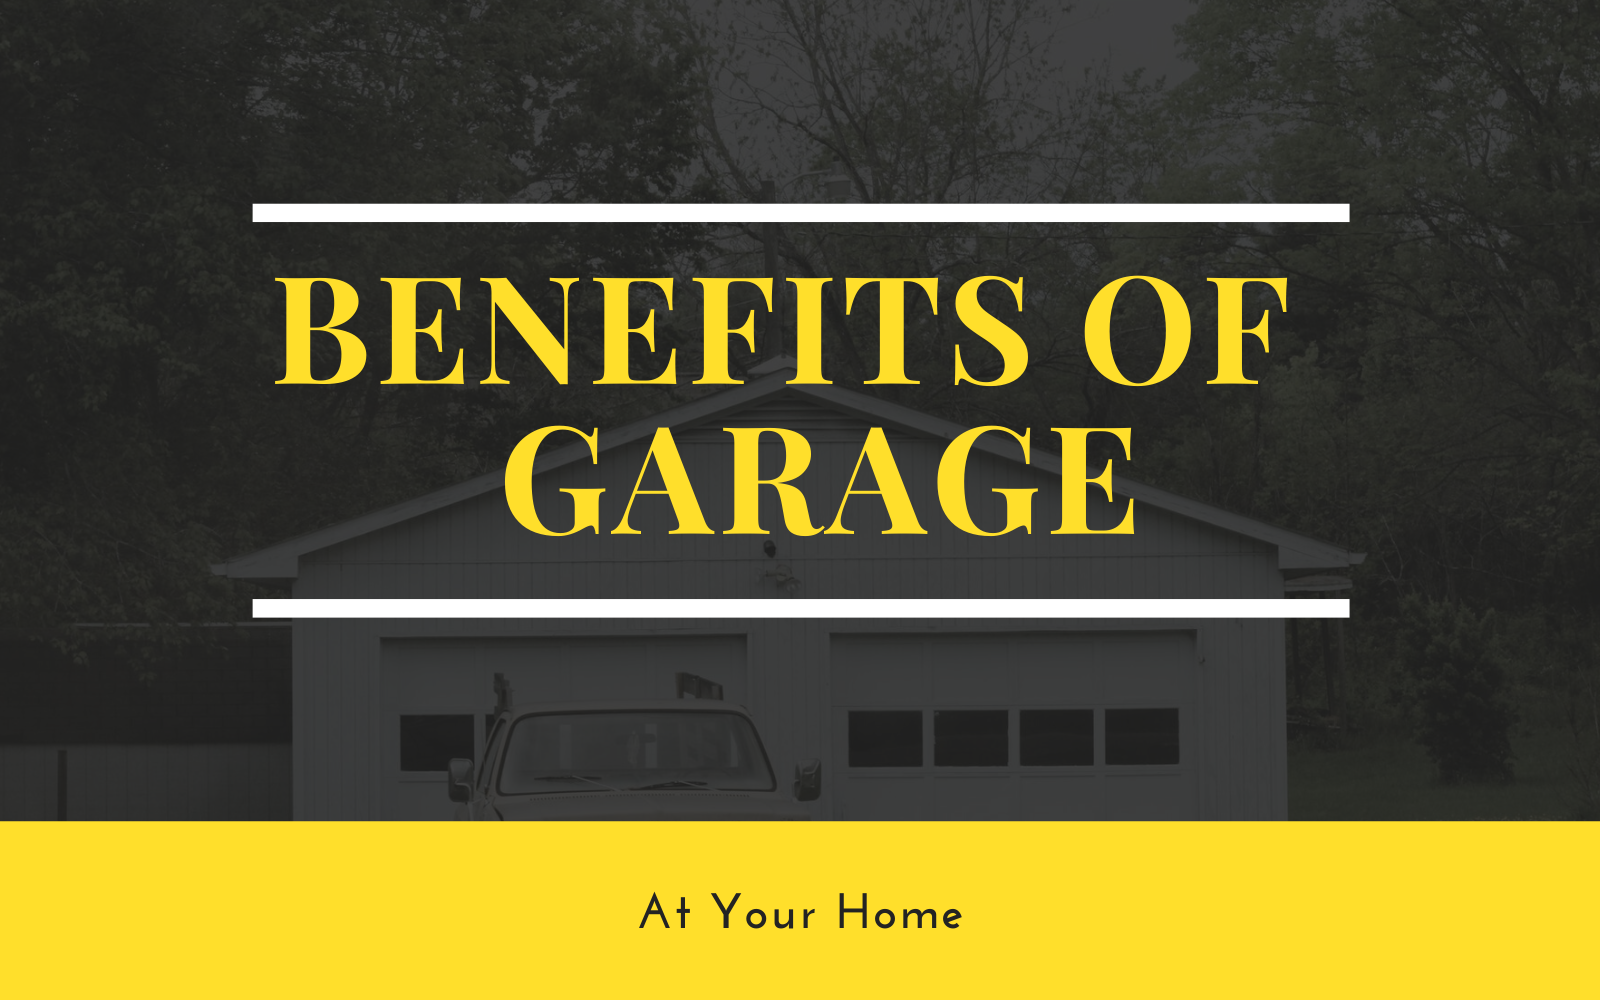 Why Garage Required